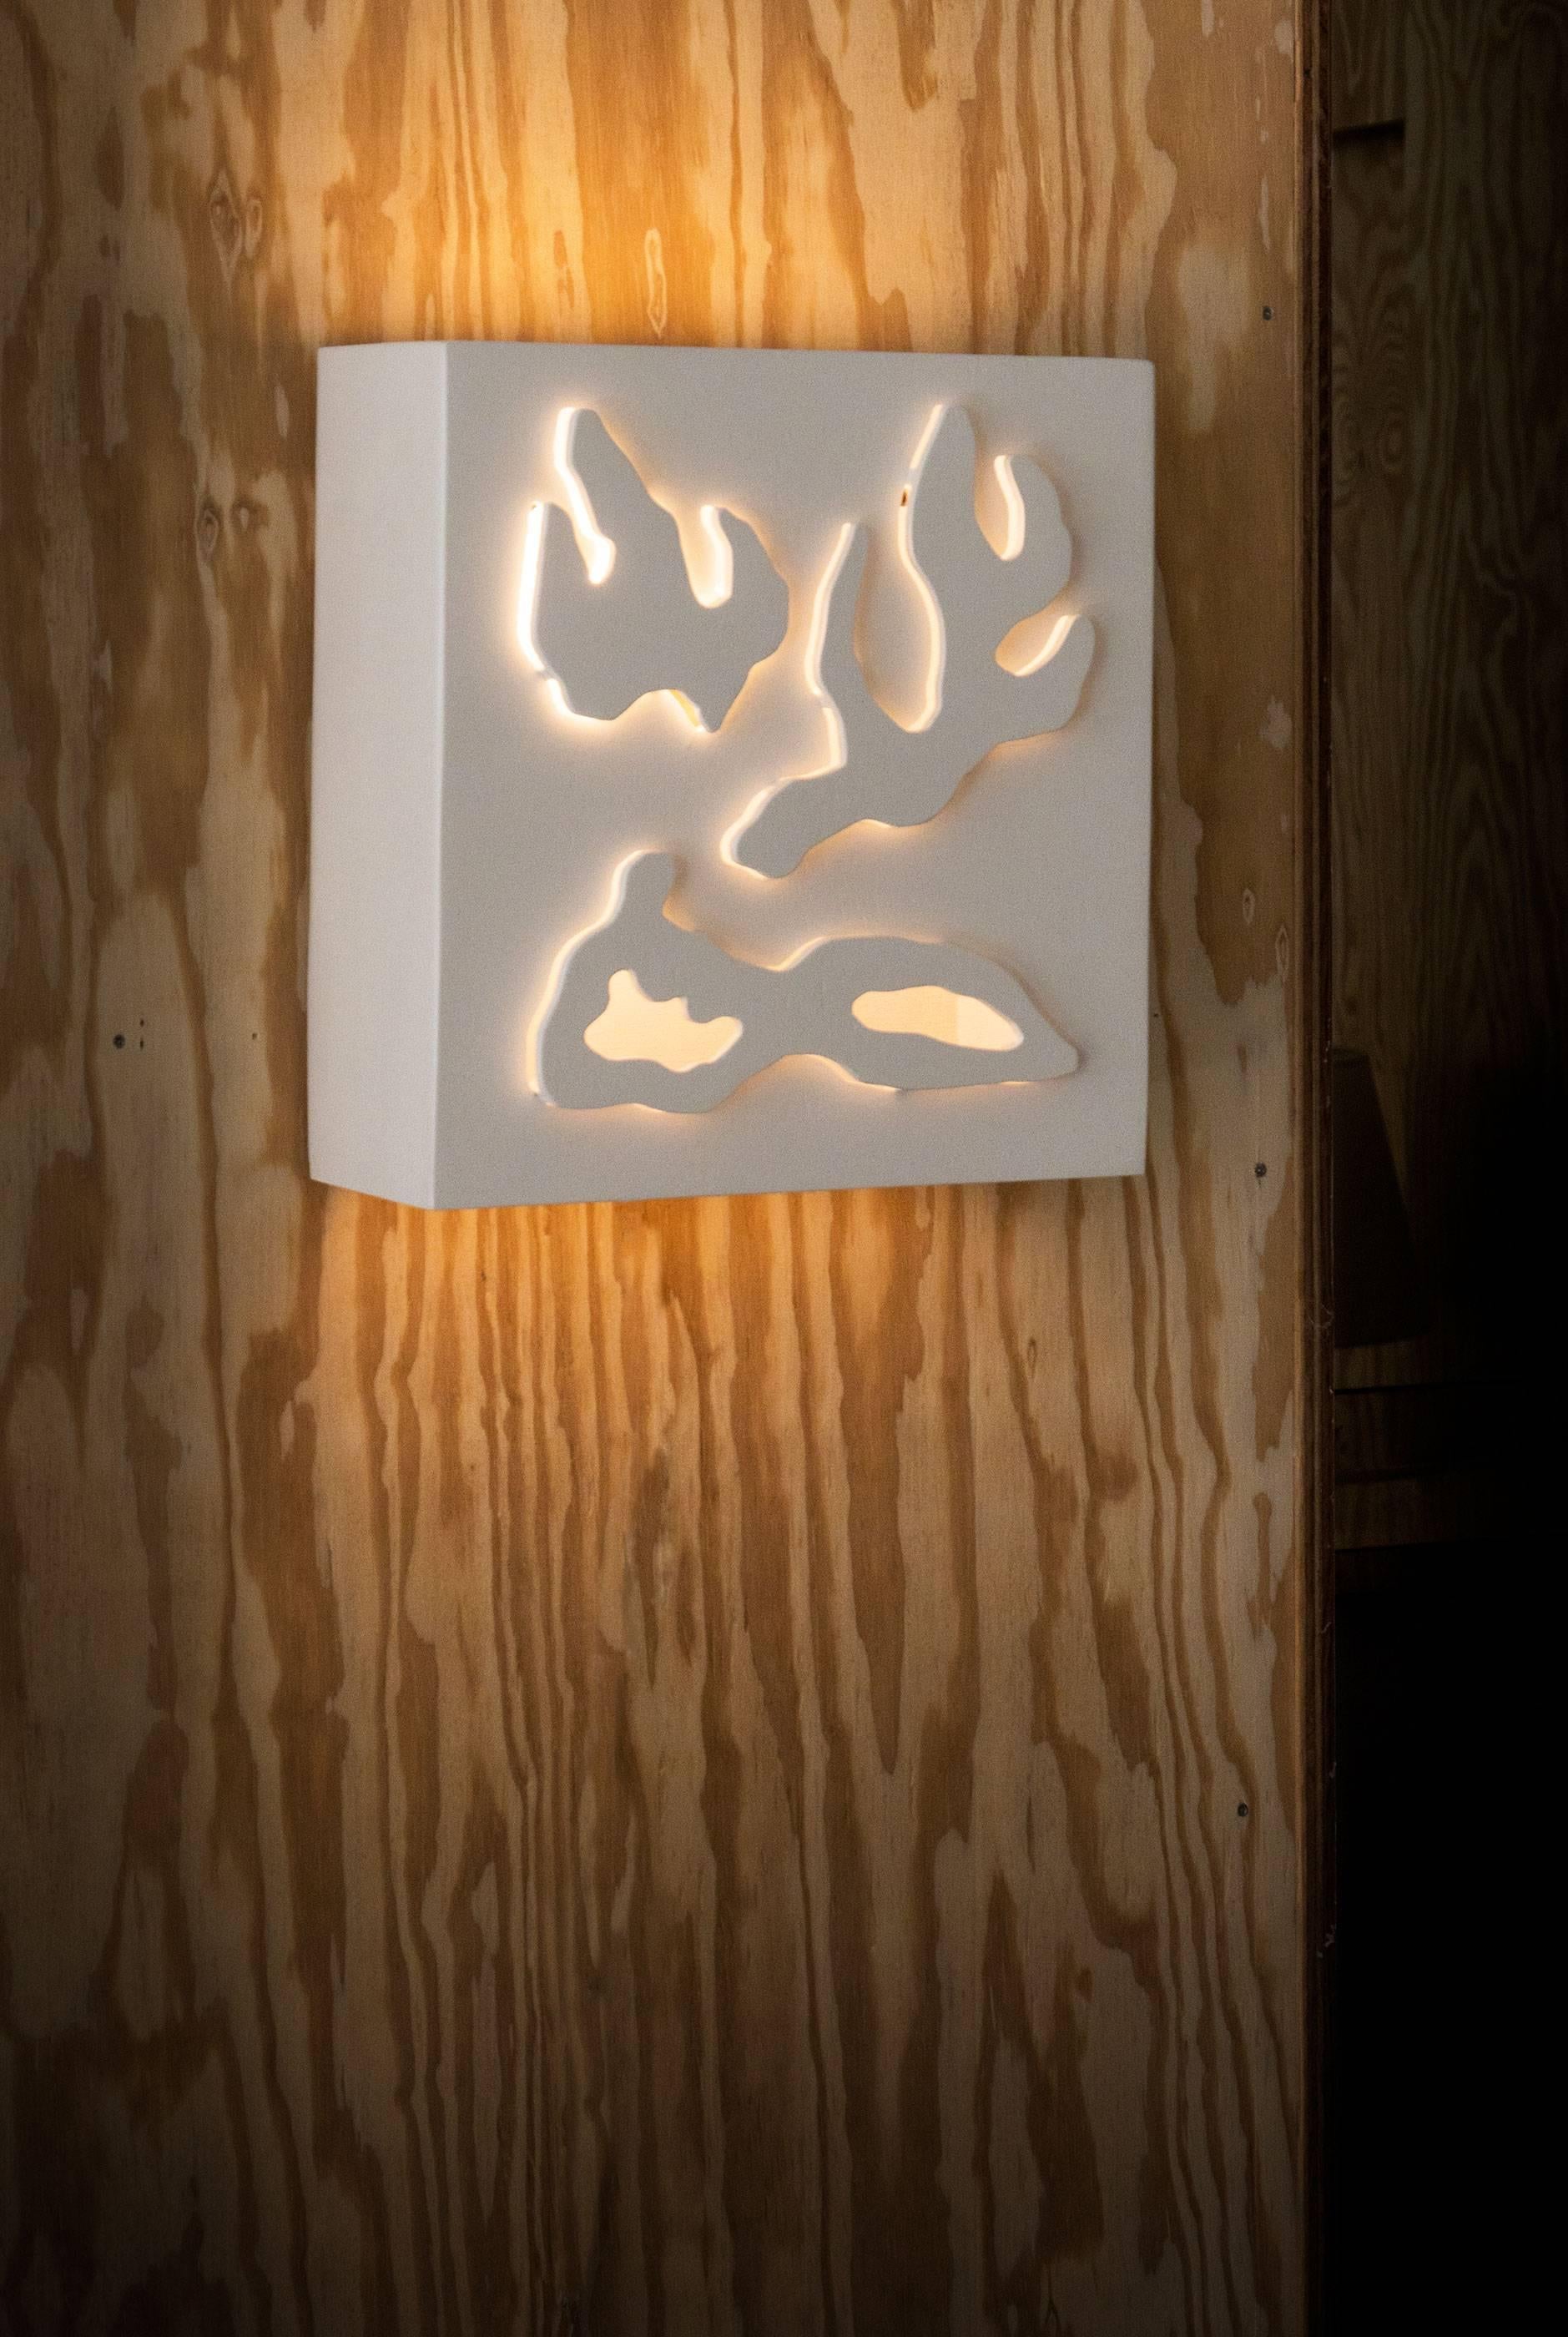 Hand cut lacquered wood sconce, wall light sculpture or table light by Jacques Jarrige. Each one is hand cut by the artist.

This lamp can be used as a wall light or a table light

Outfitted with one bulb but can be adjusted as desired.